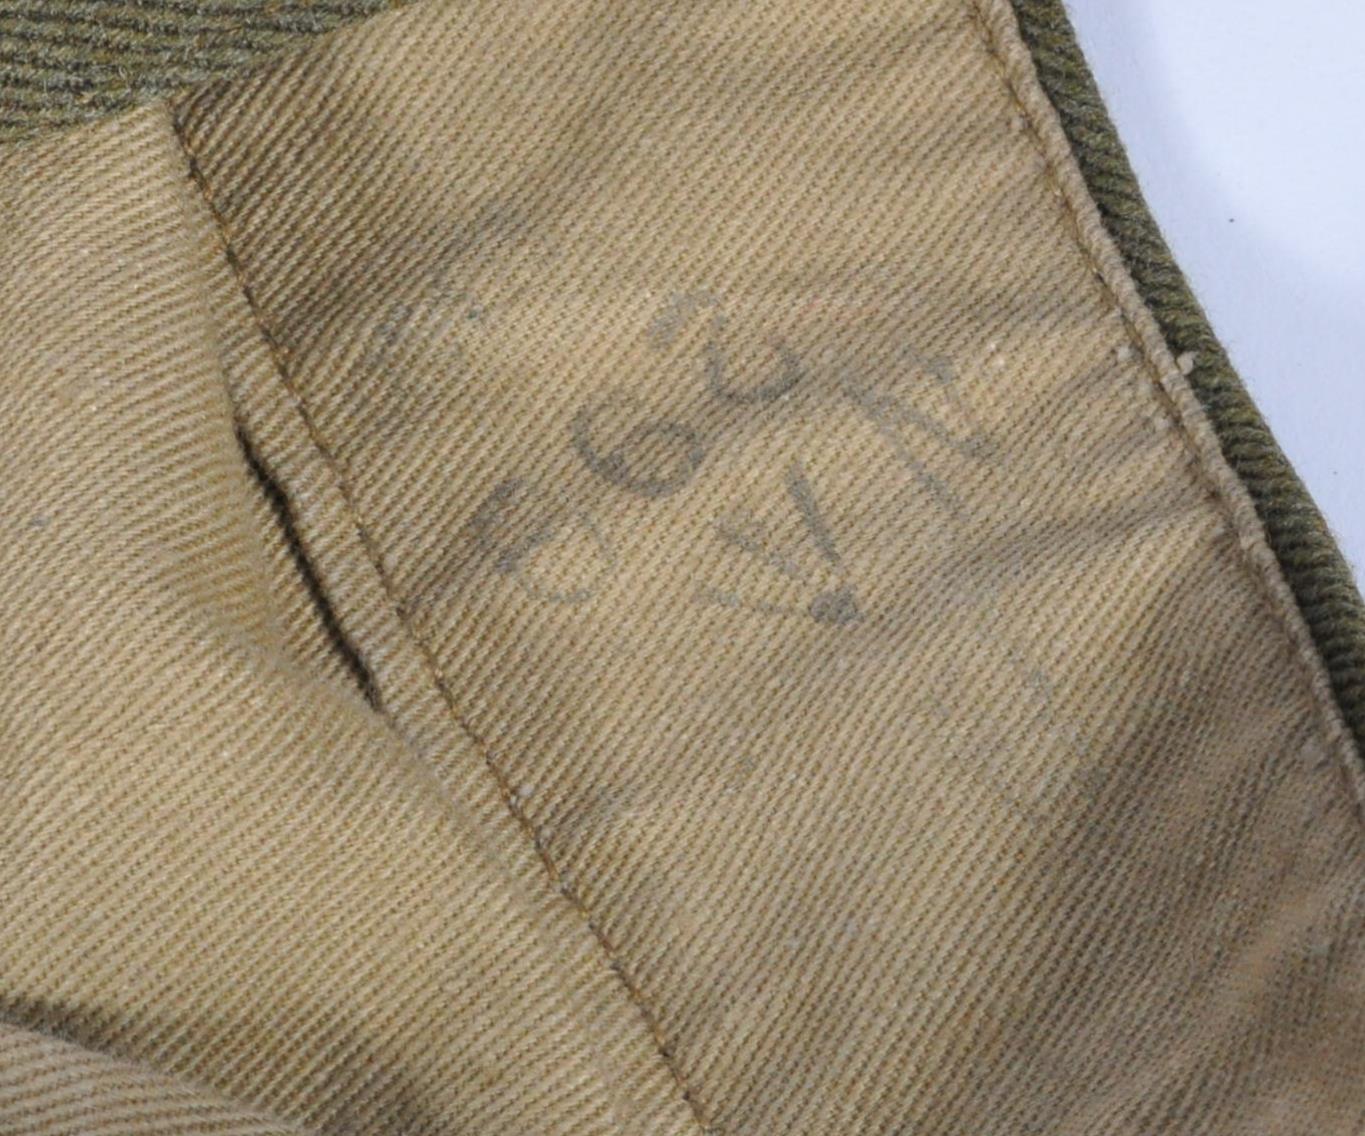 WWII SECOND WORLD WAR BRITISH ARMY UNIFORM BREECHES / TROUSERS - Image 6 of 6